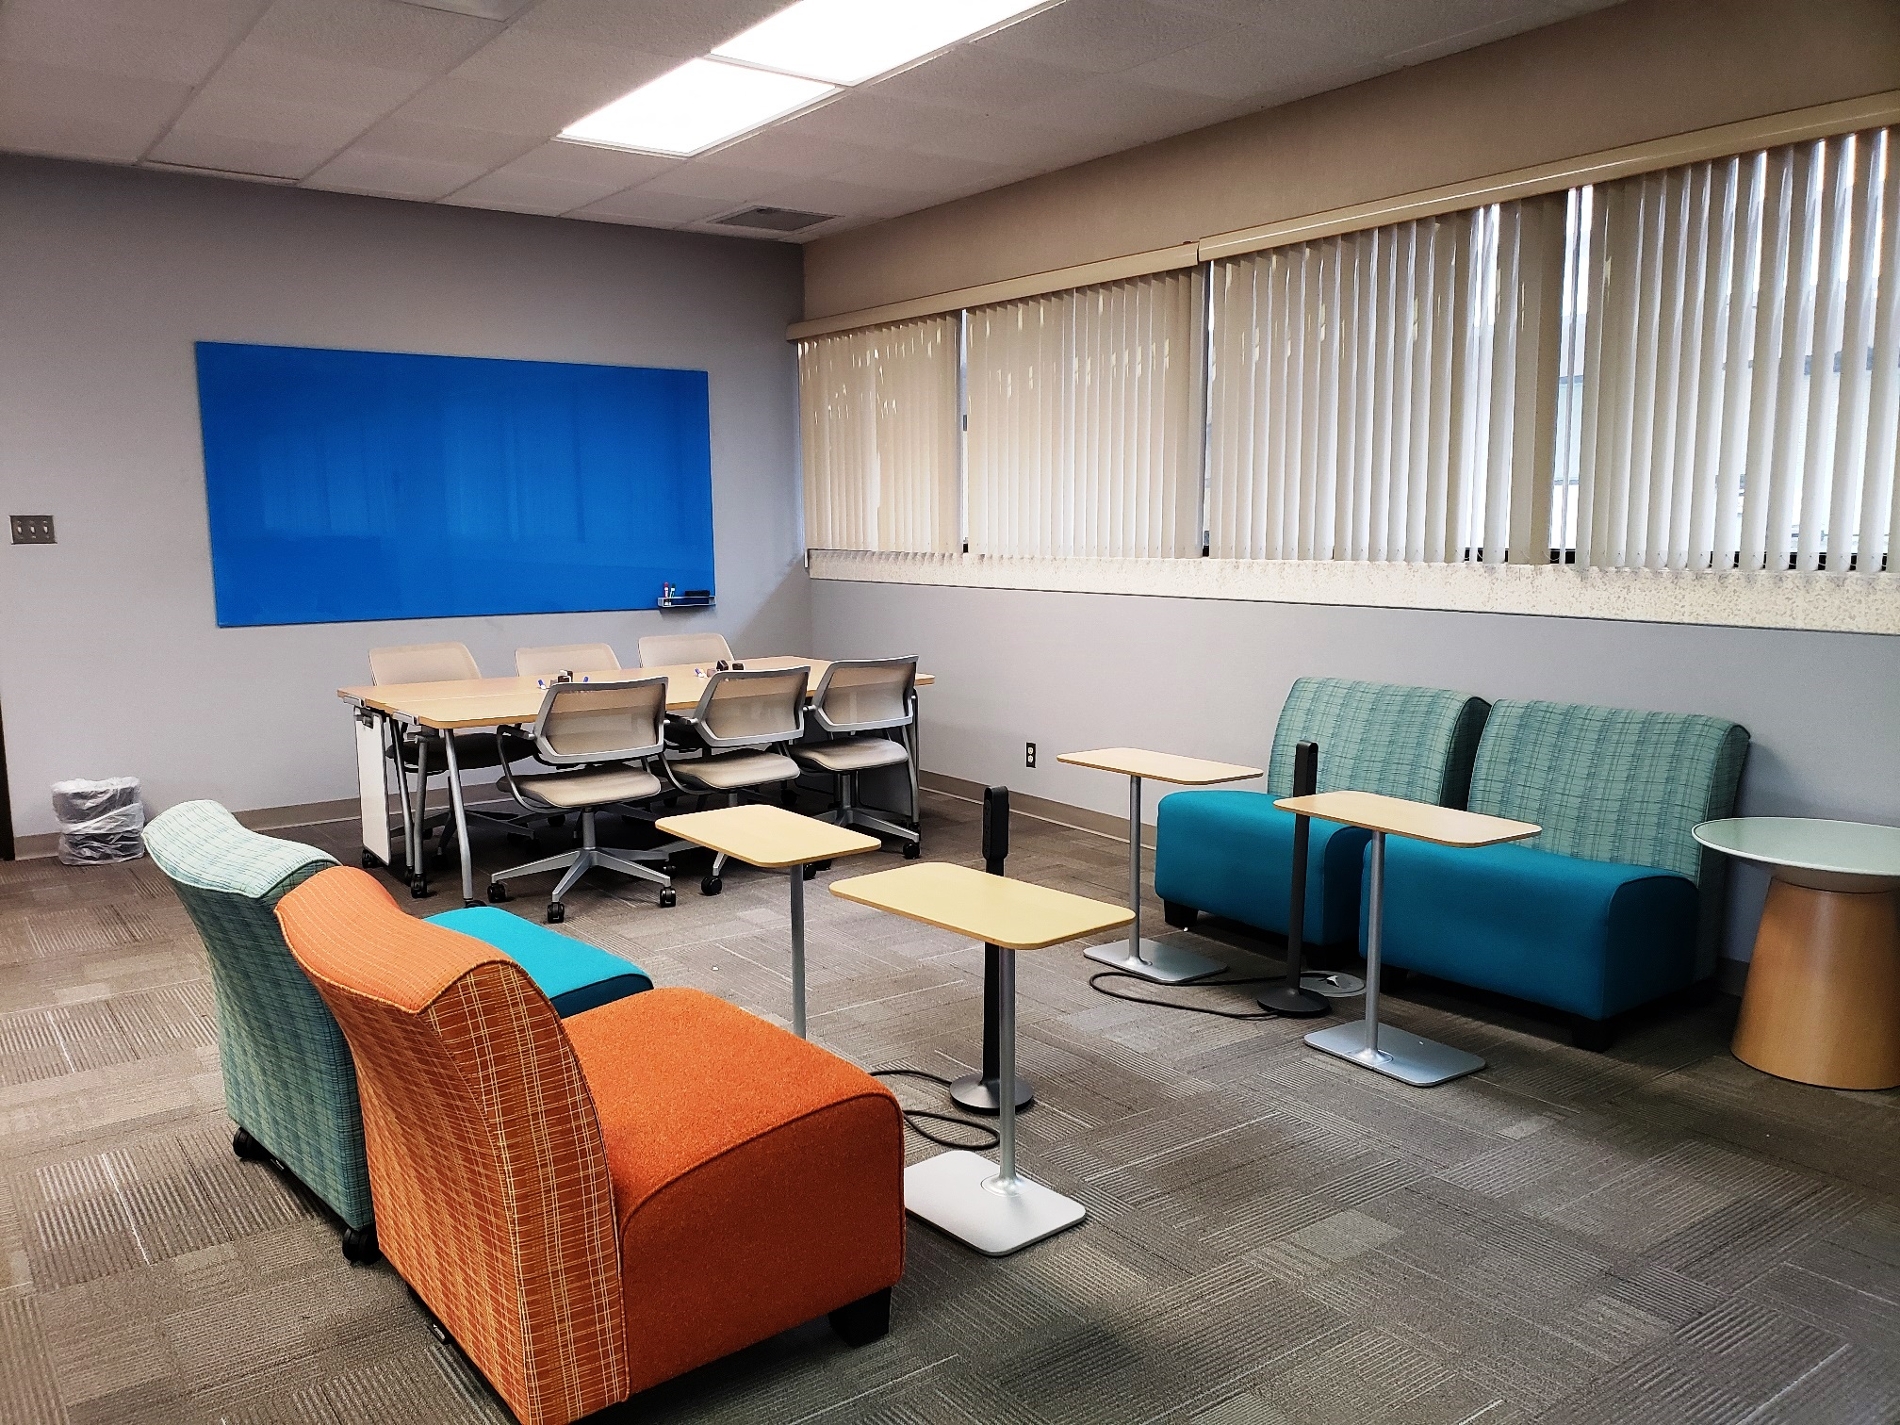 Corner of main Collaboratory room with various sized tables/chairs and a dry erase board.